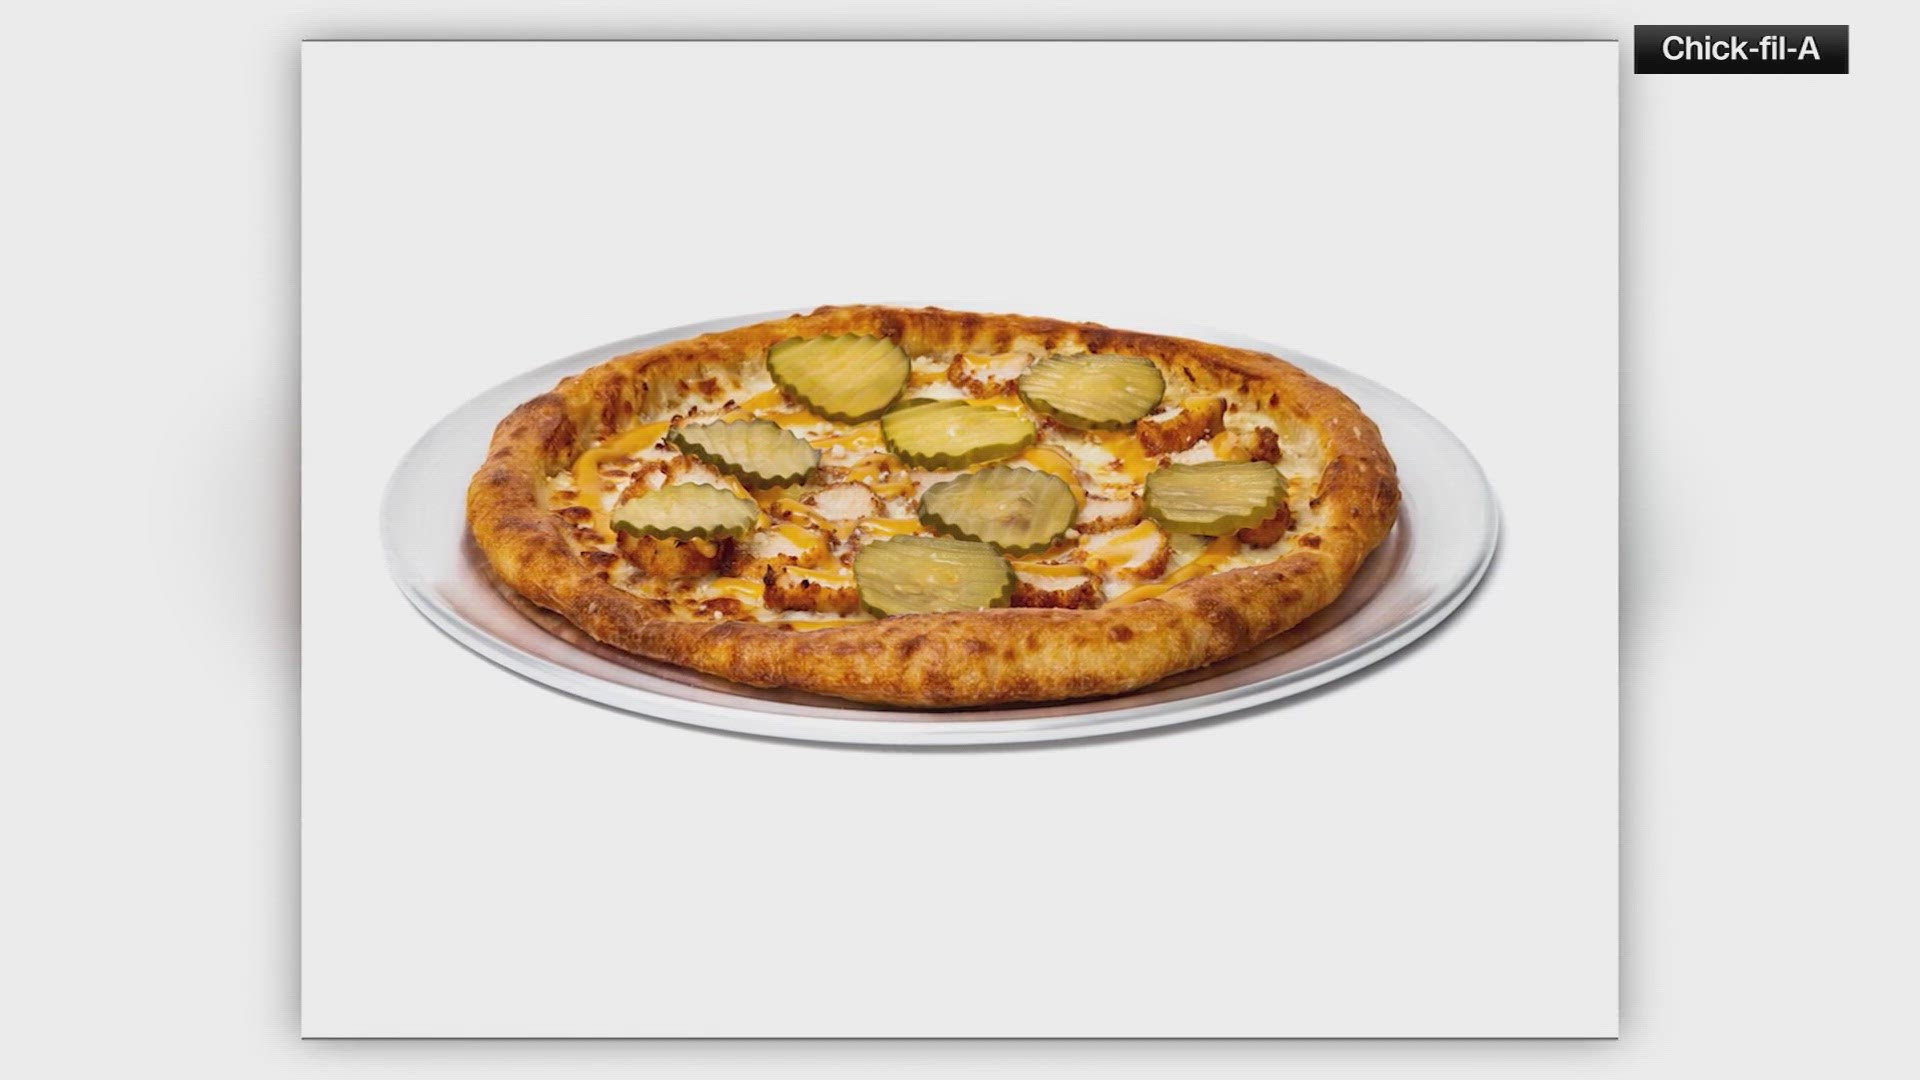 The Chick-fil-A Pizza Pie turns their signature sandwich into a pizza, complete with nuggets, pickles and a drizzle of Chick-fil-A sauce.